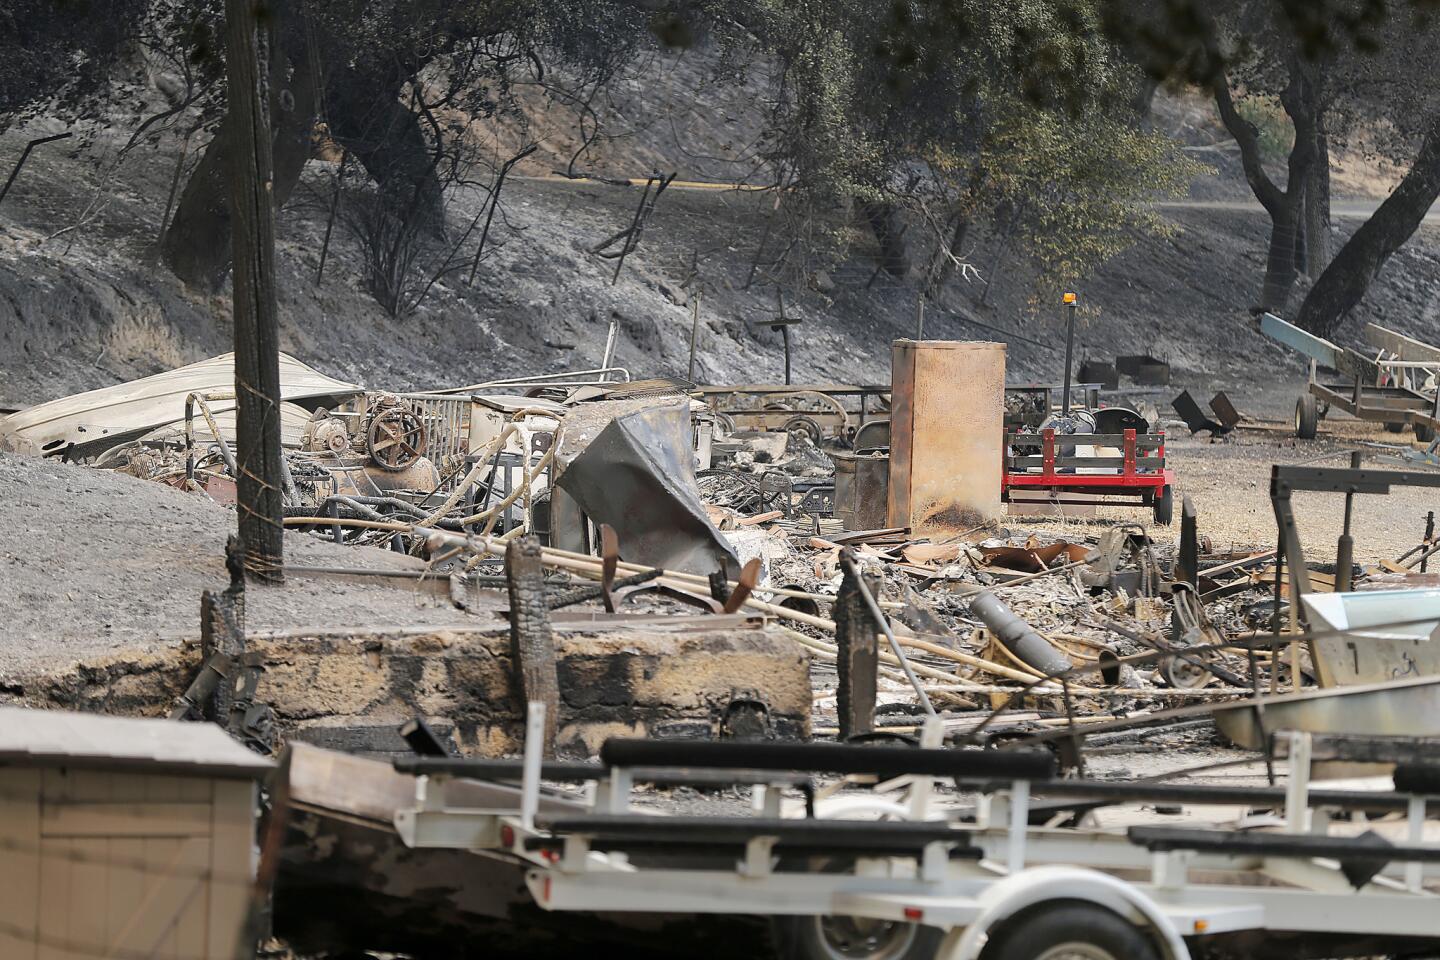 The remains of a structure and boats scorched by the Whittier fire sit along State Route 154 in Los